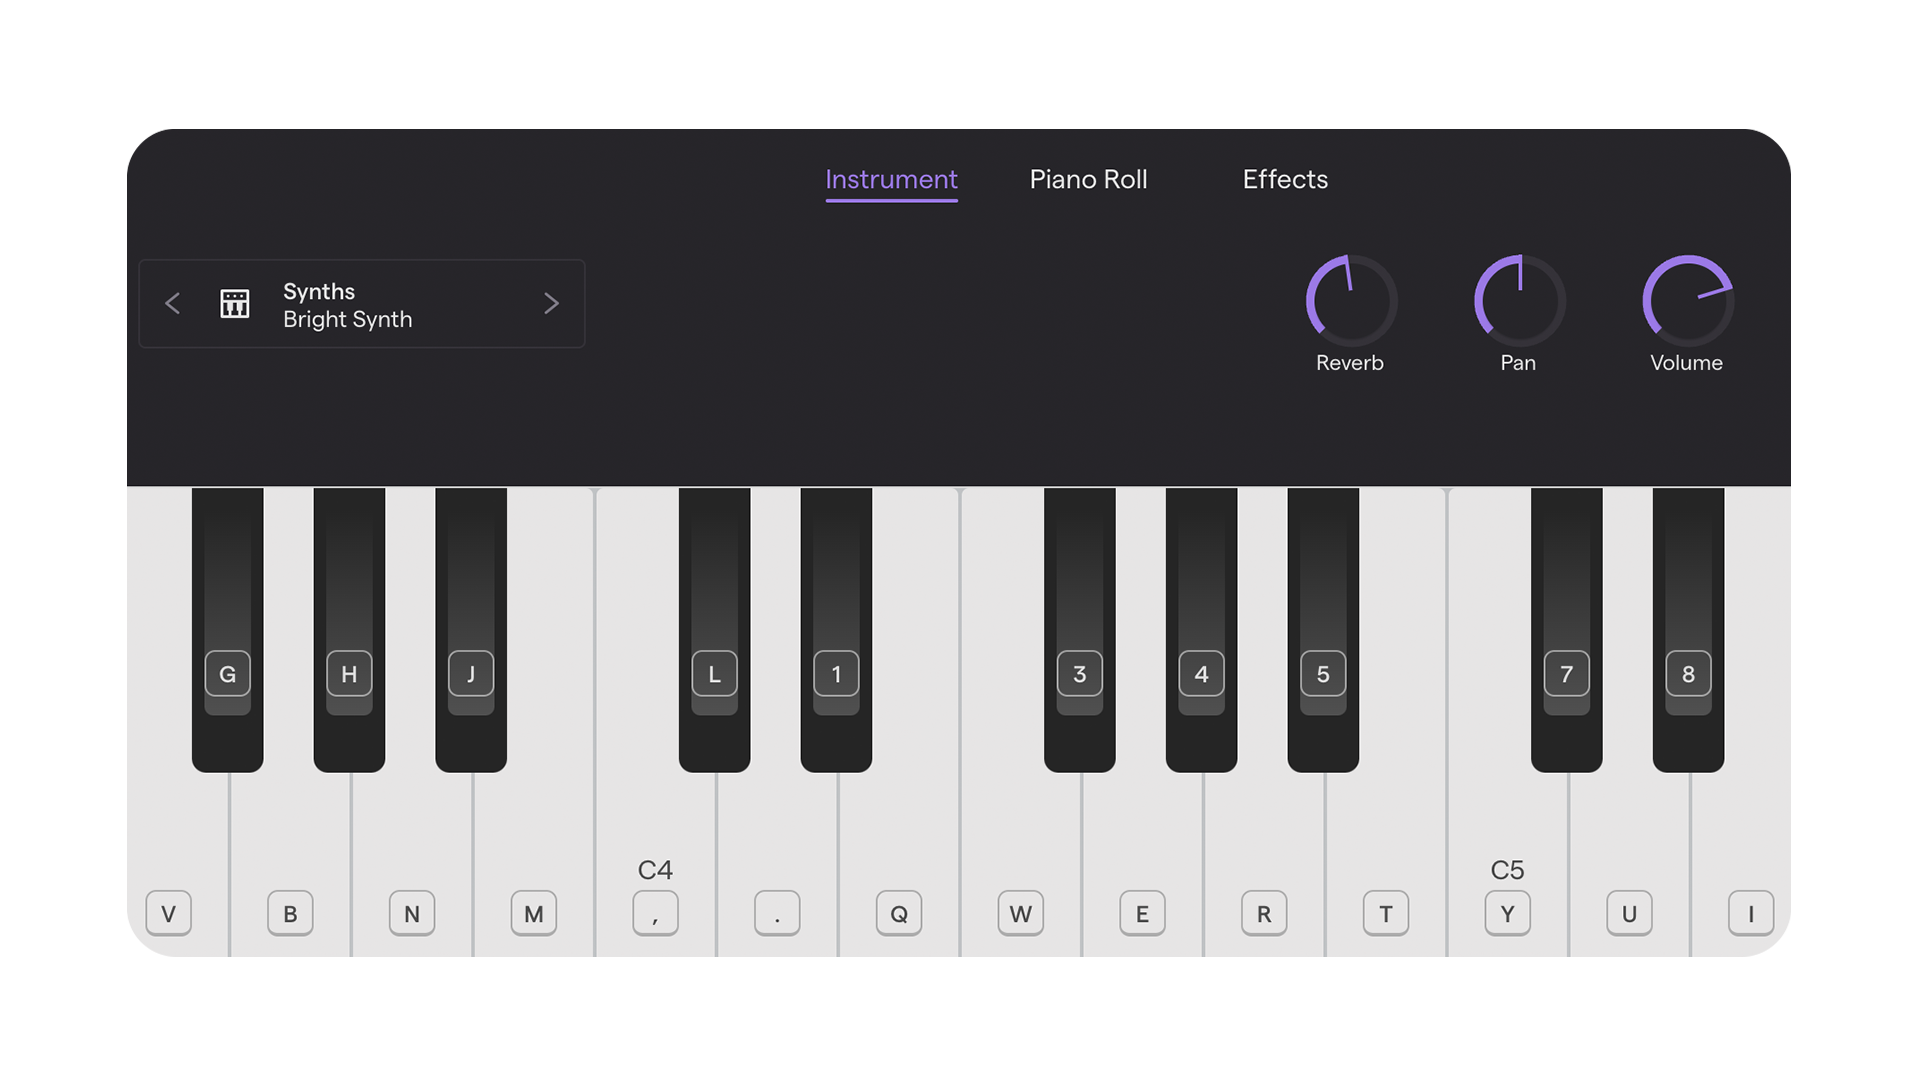 Create Music with Soundtrap's Online Piano